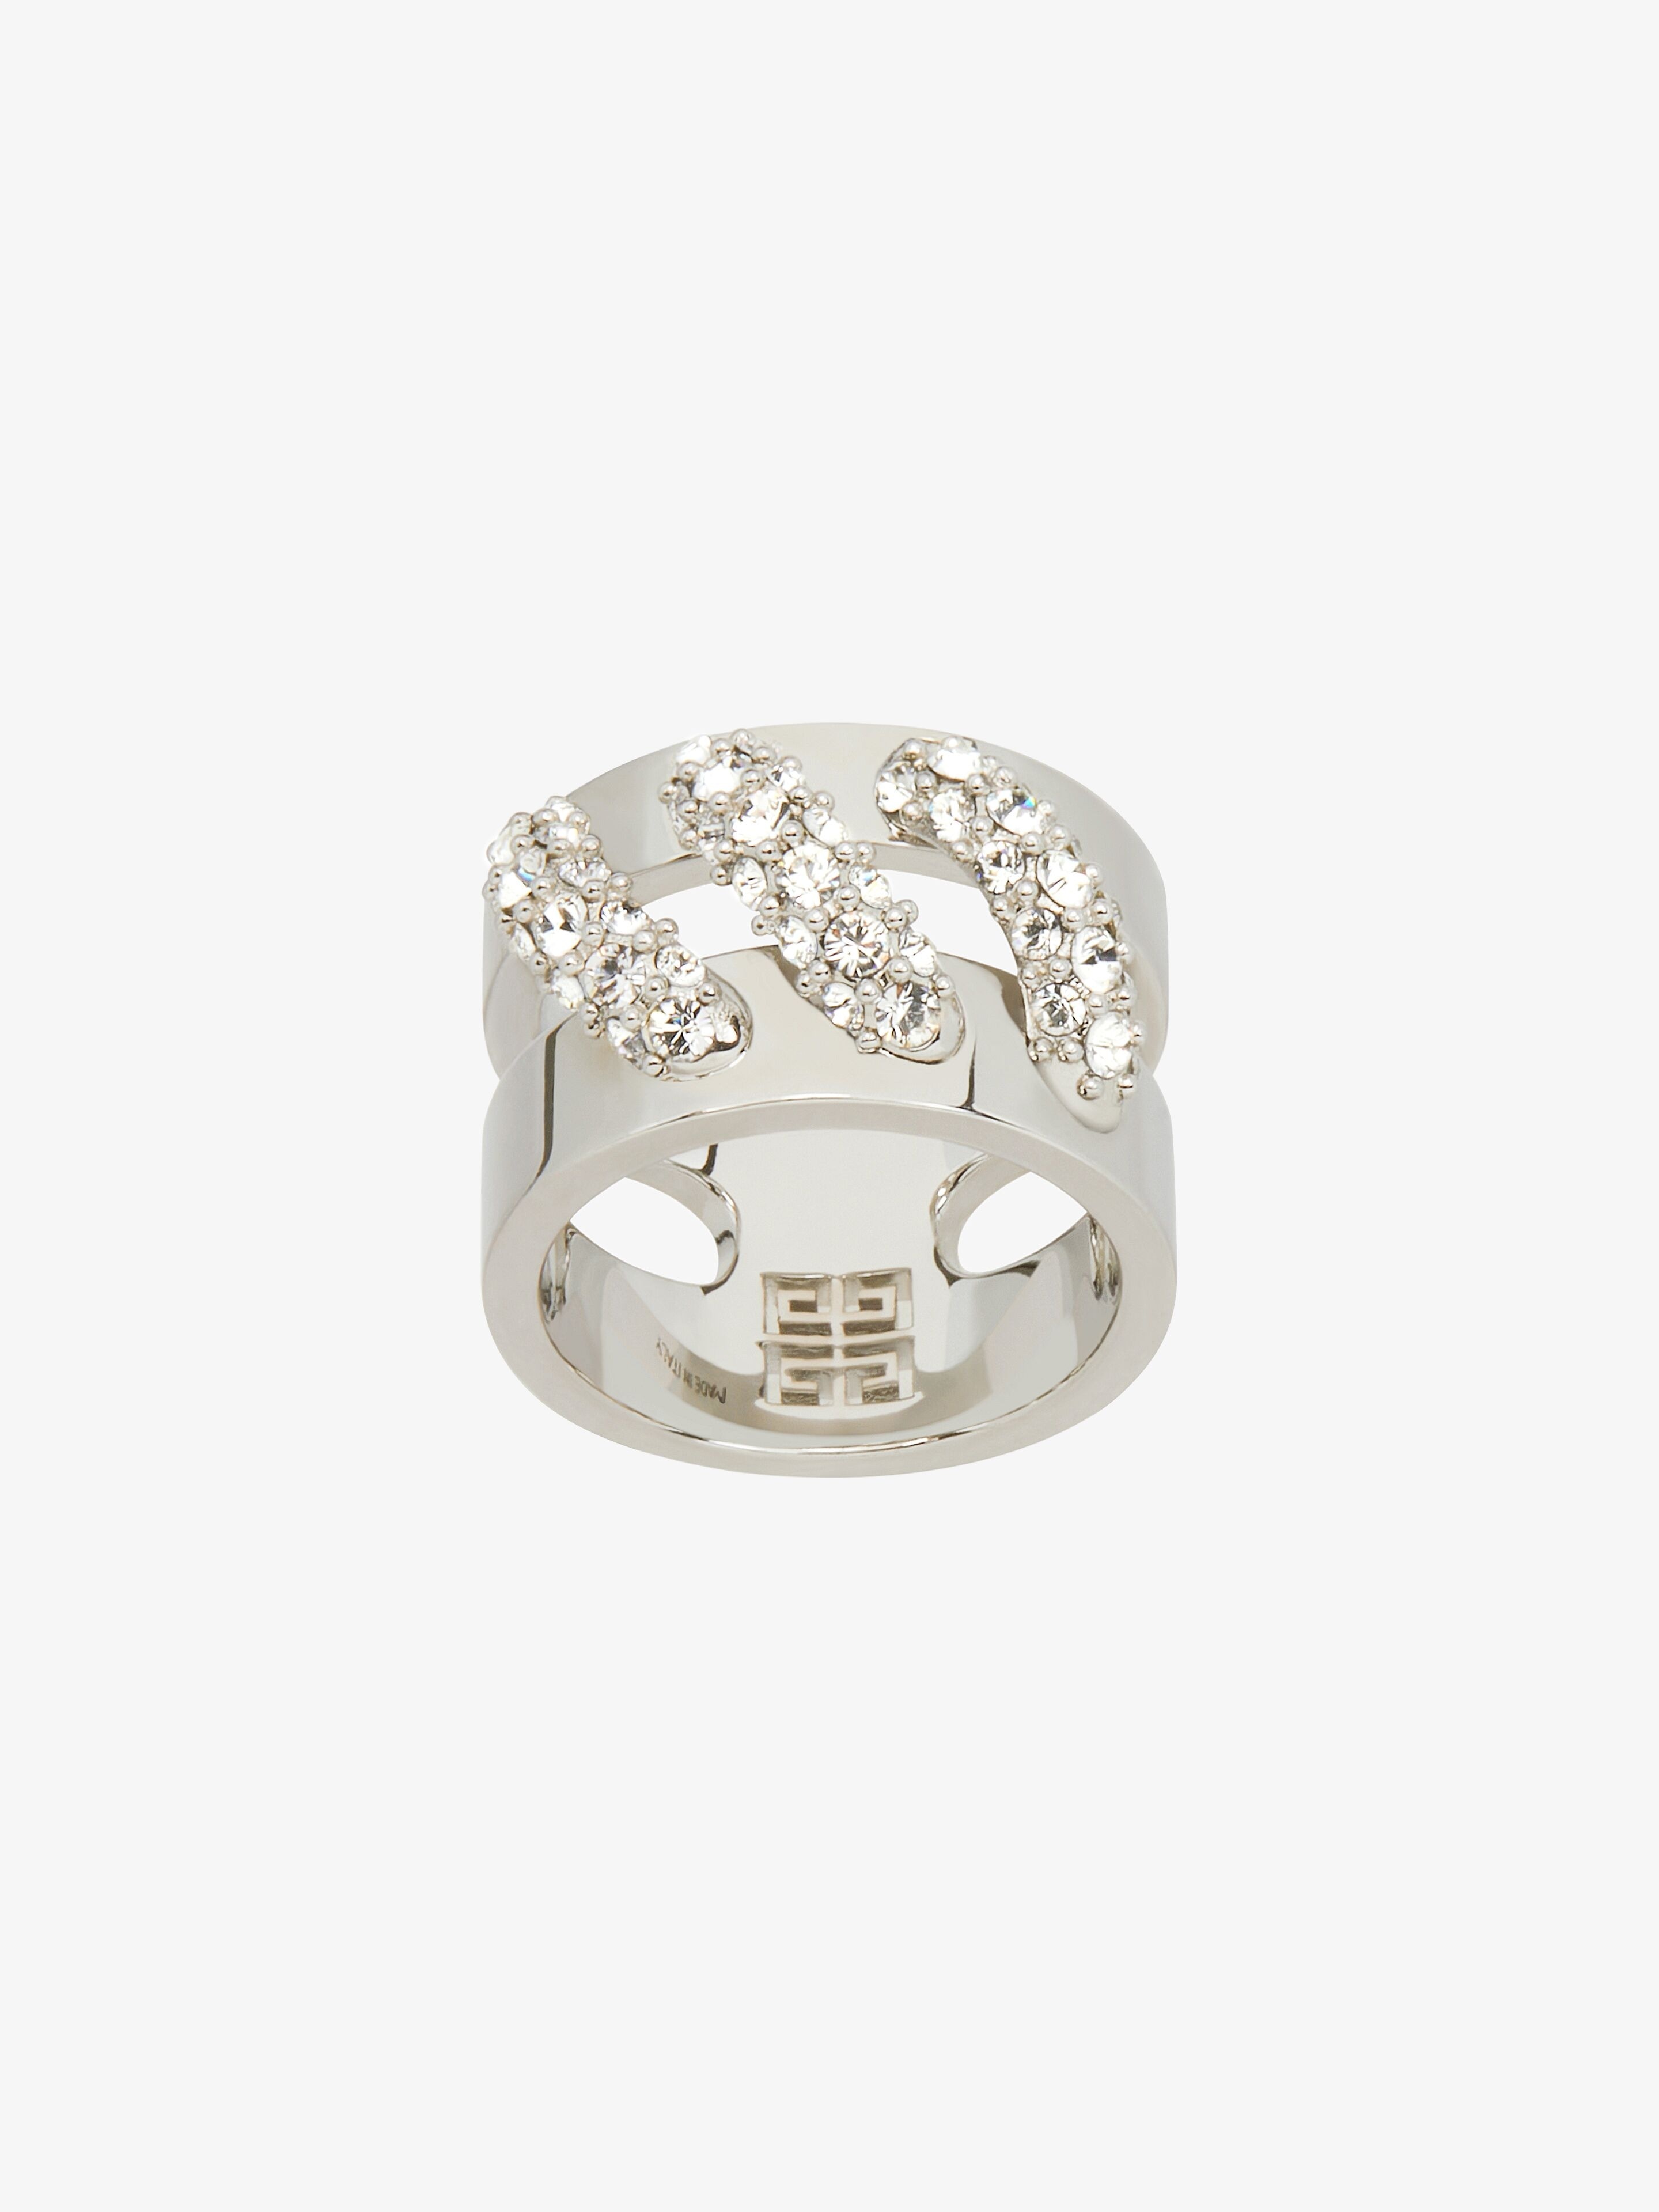 STITCH RING IN METAL WITH CRYSTALS - 4